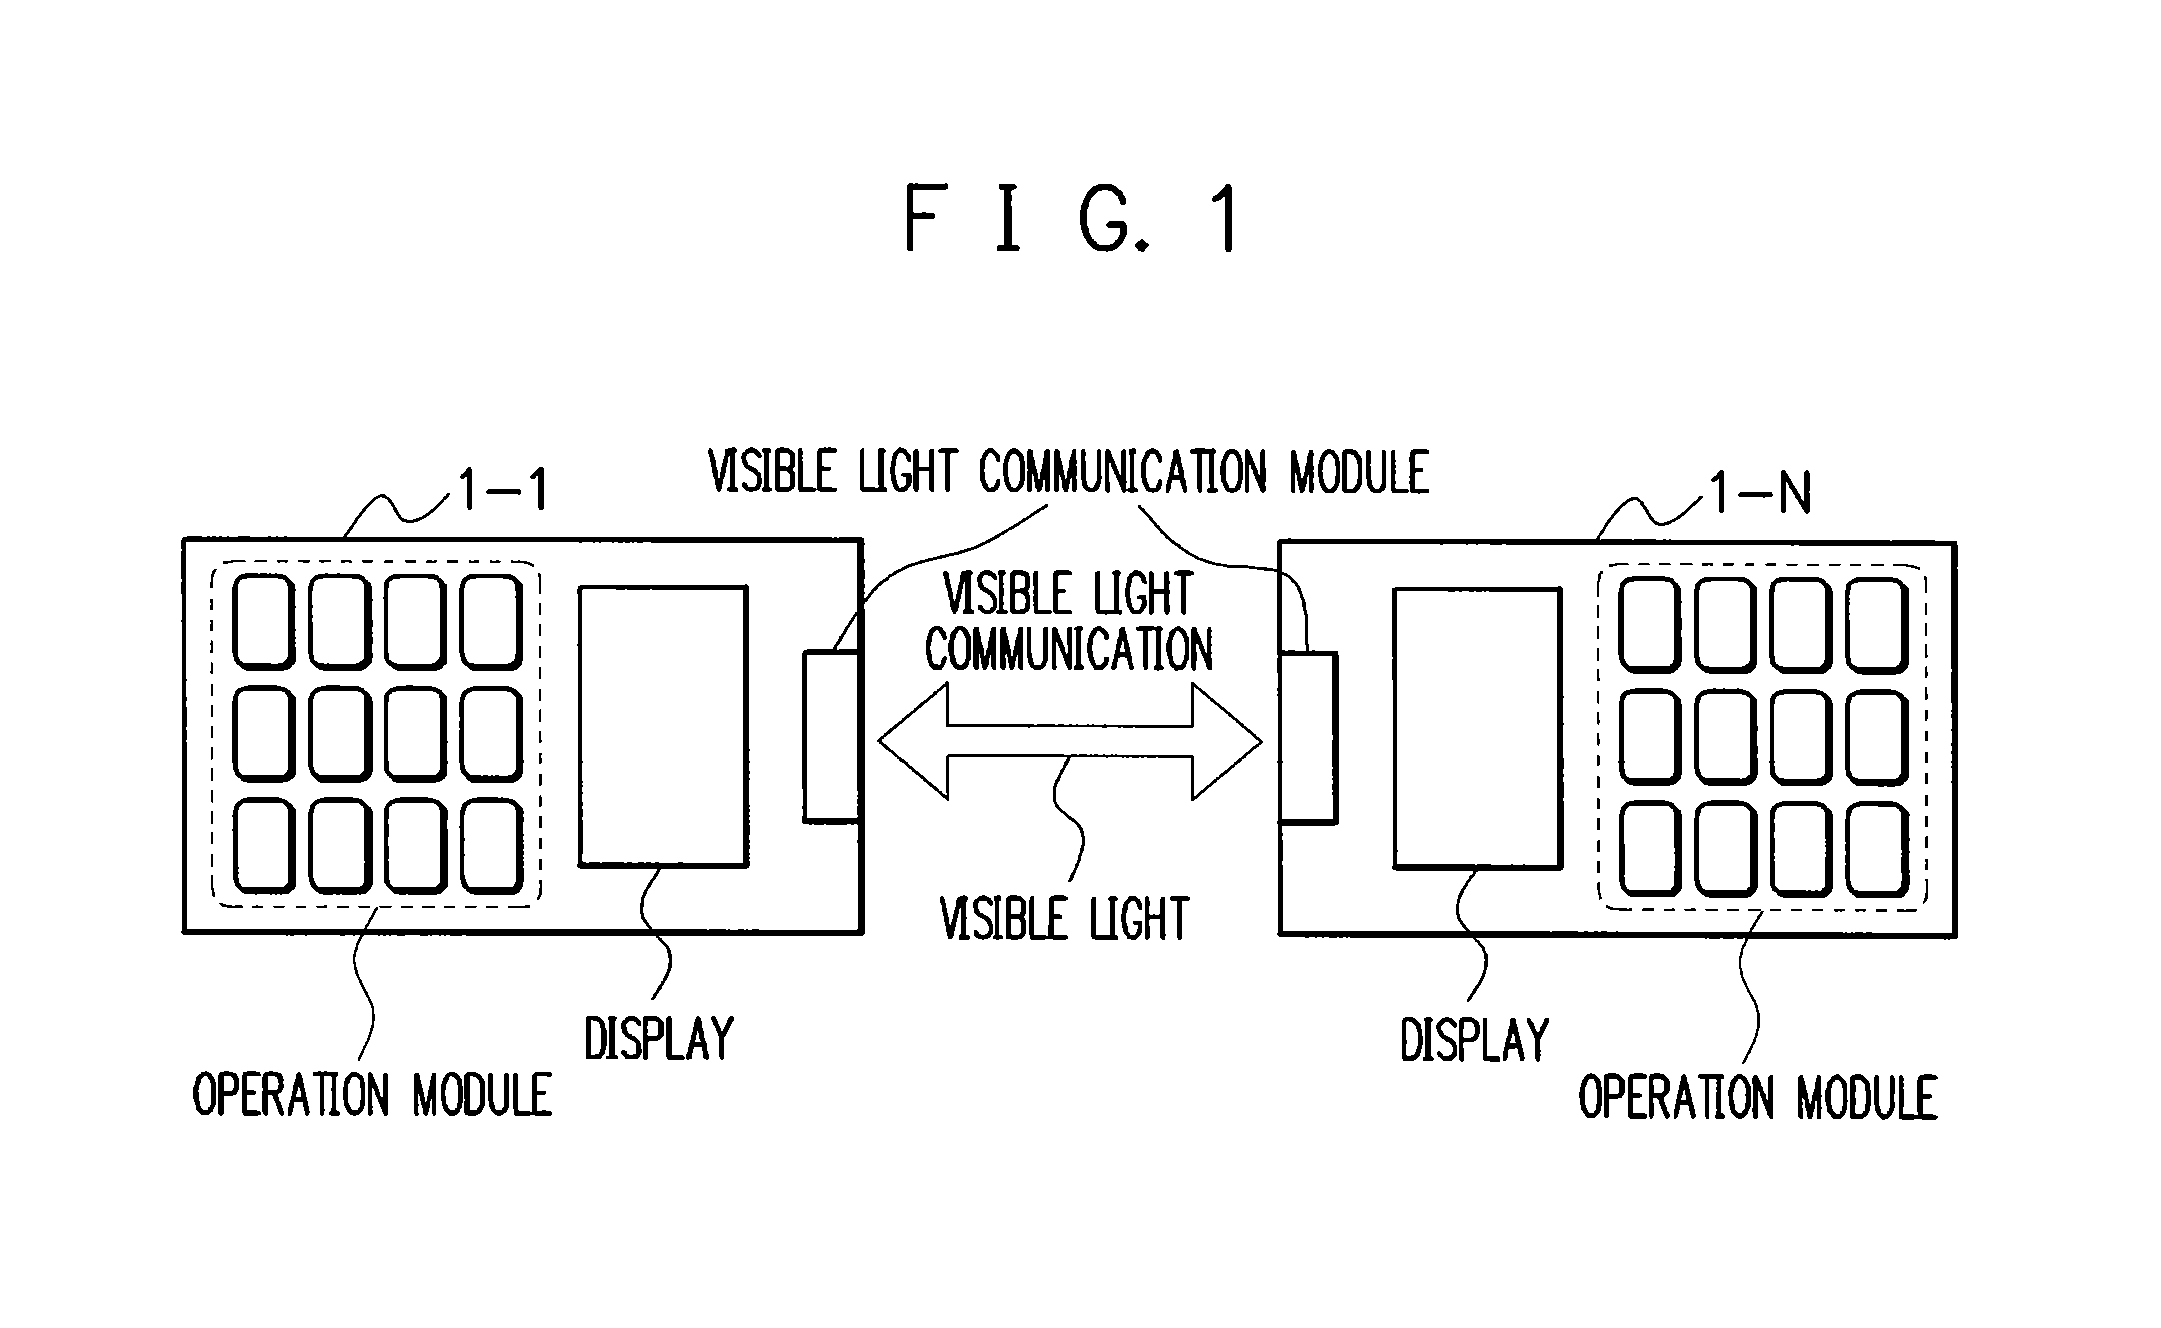 Apparatus, system, method, and program for visible light communication